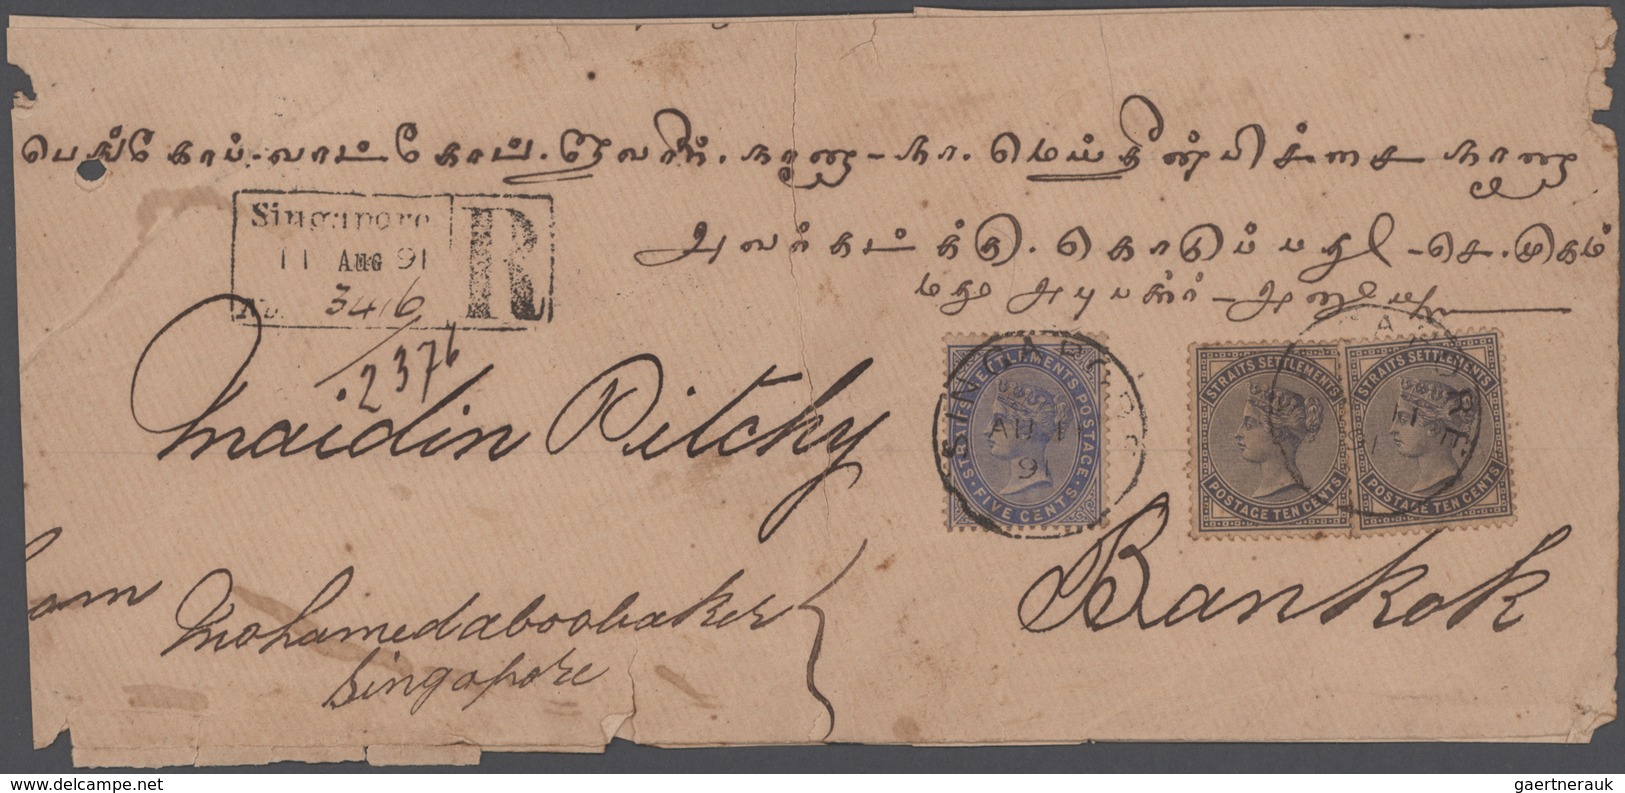 Singapur: 1880's-1950's: About 1500-1600 covers used in Singapore and franked by Straits Settlements